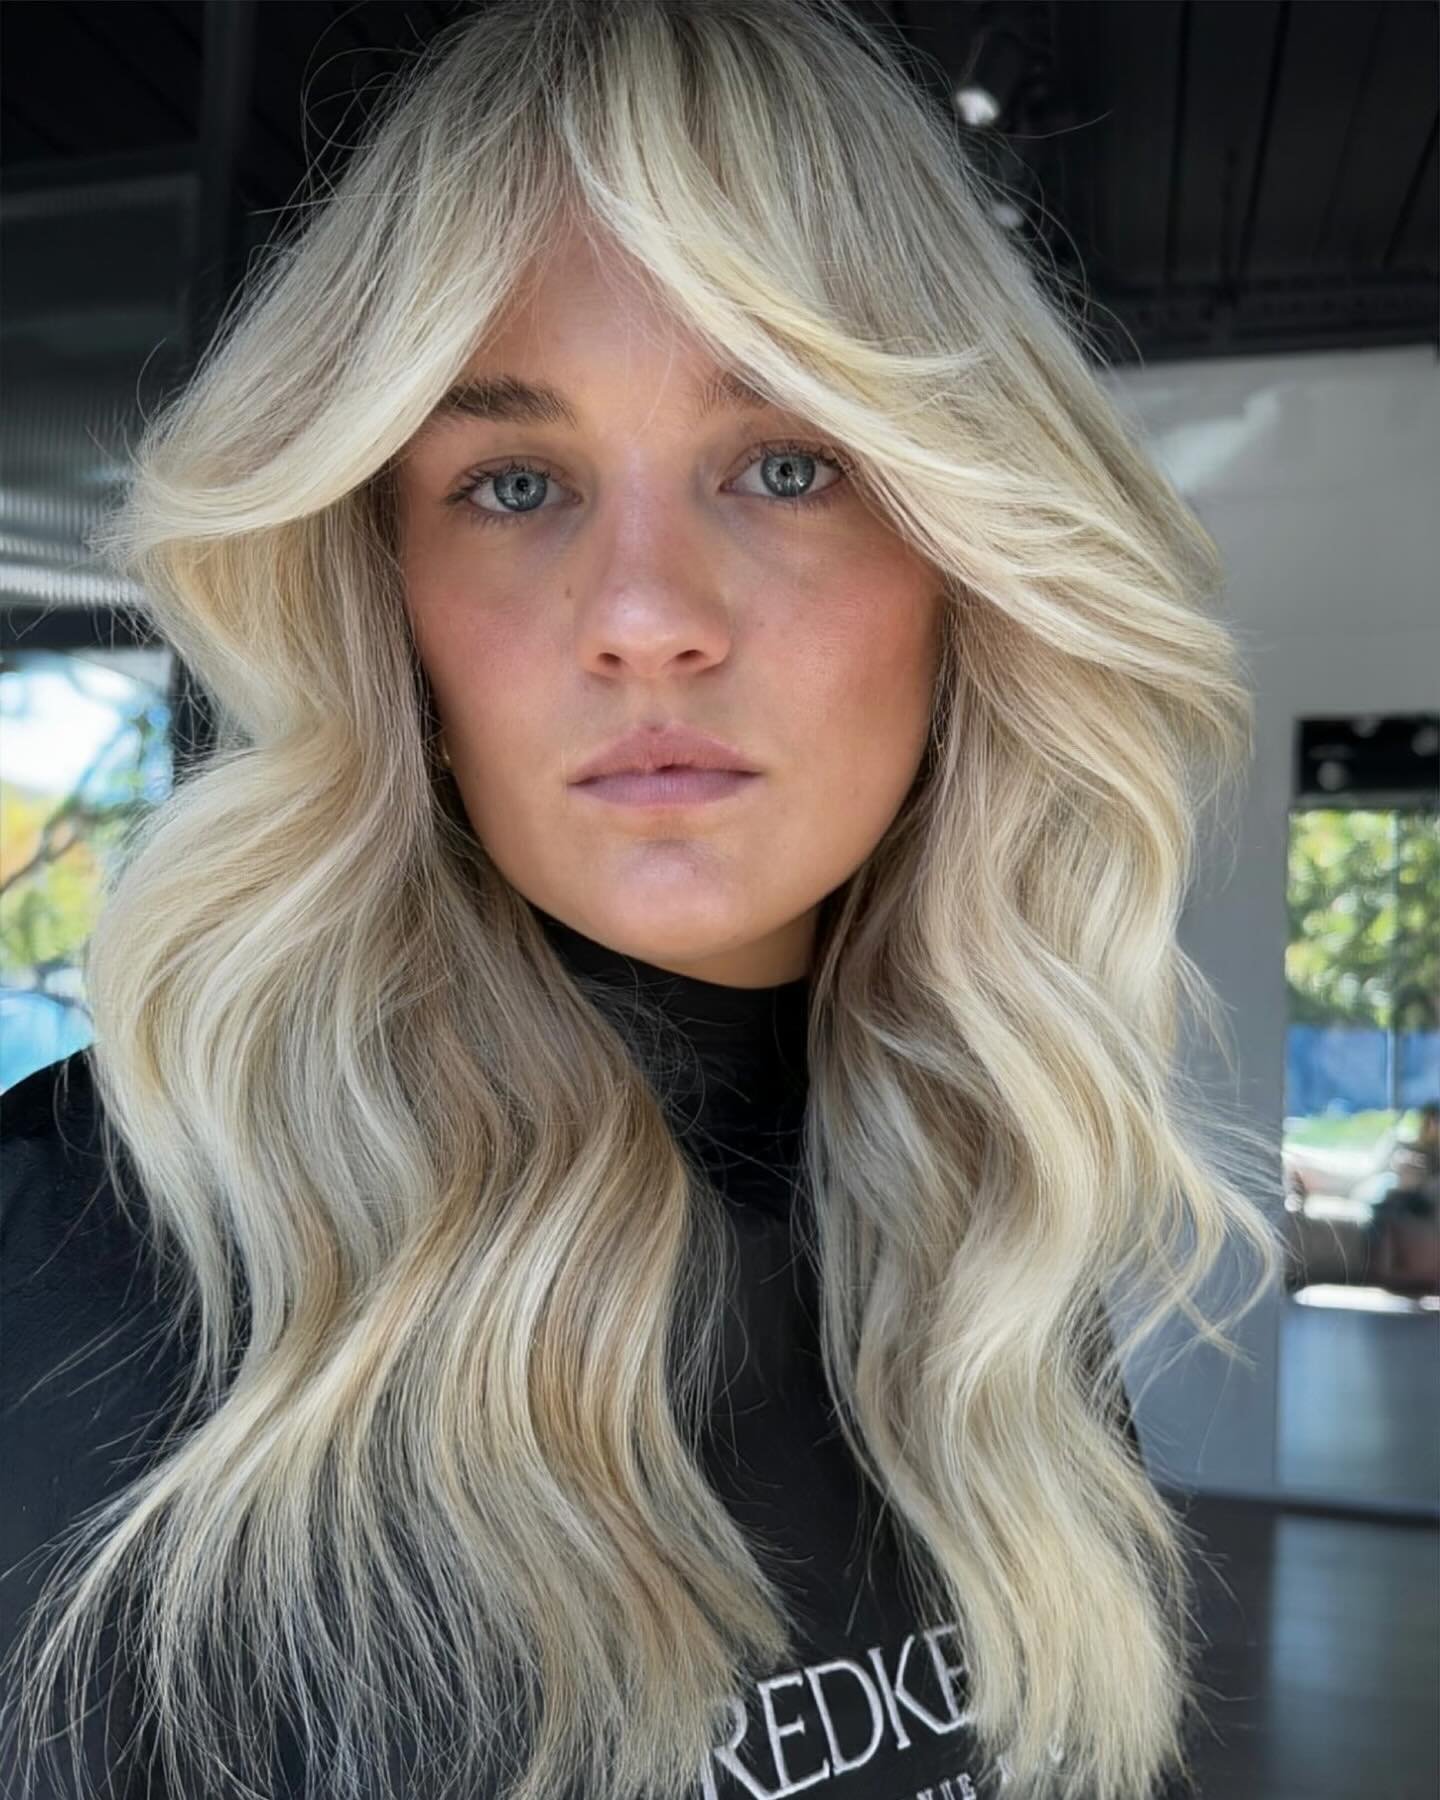 Victoria secret called... they want their blonde back!

EVA looking 🔥 with this bright blonde and short bangs

SAVE this if you struggle to describe the type of blonde you&rsquo;re after

Located - KENT TOWN - 0439 688 474 x

#hairgoals #hairdresser